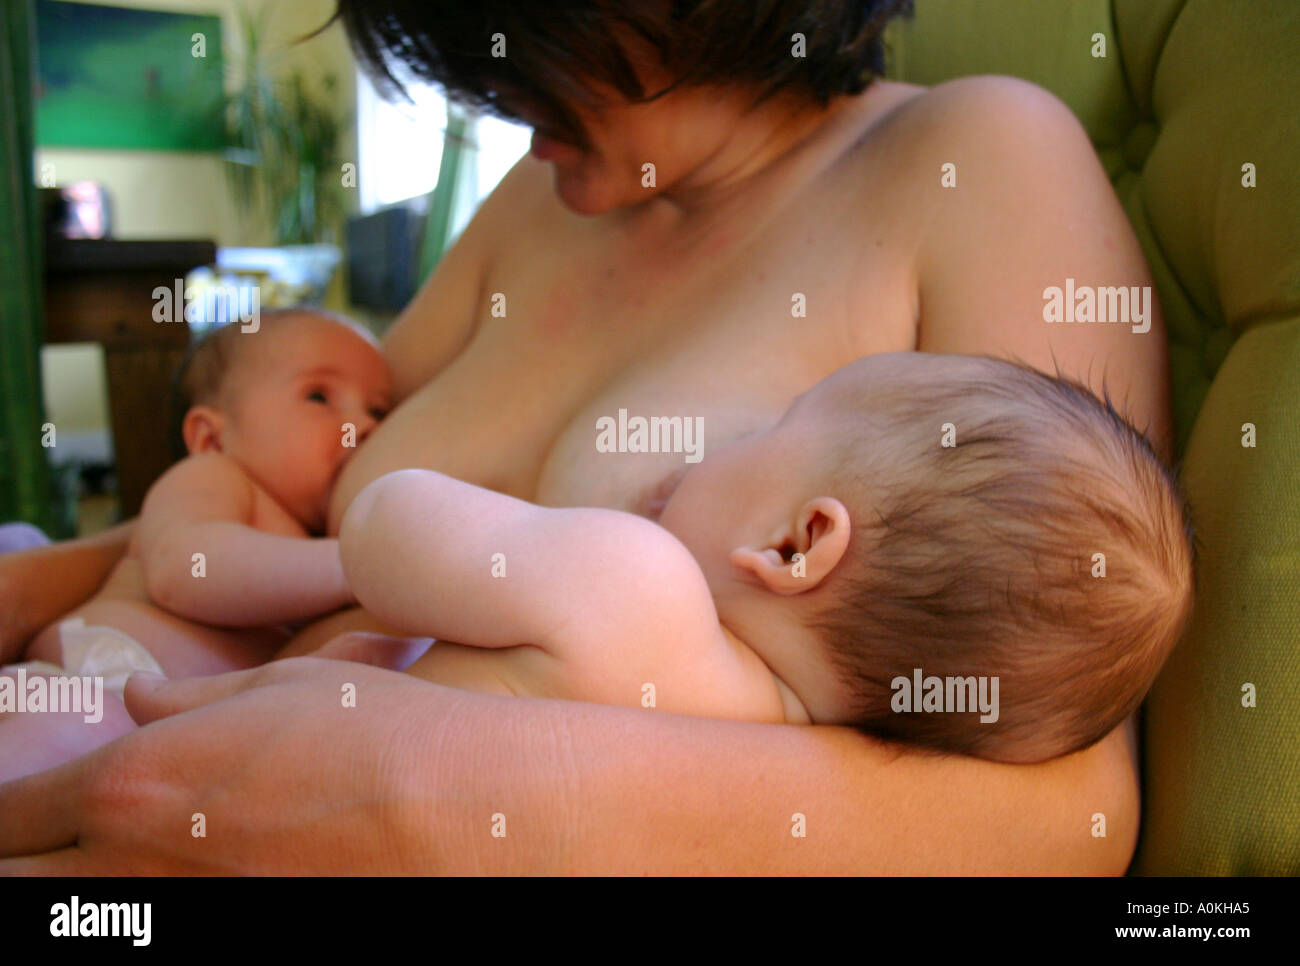 mother breastfeeding twin babies side view Stock Photo